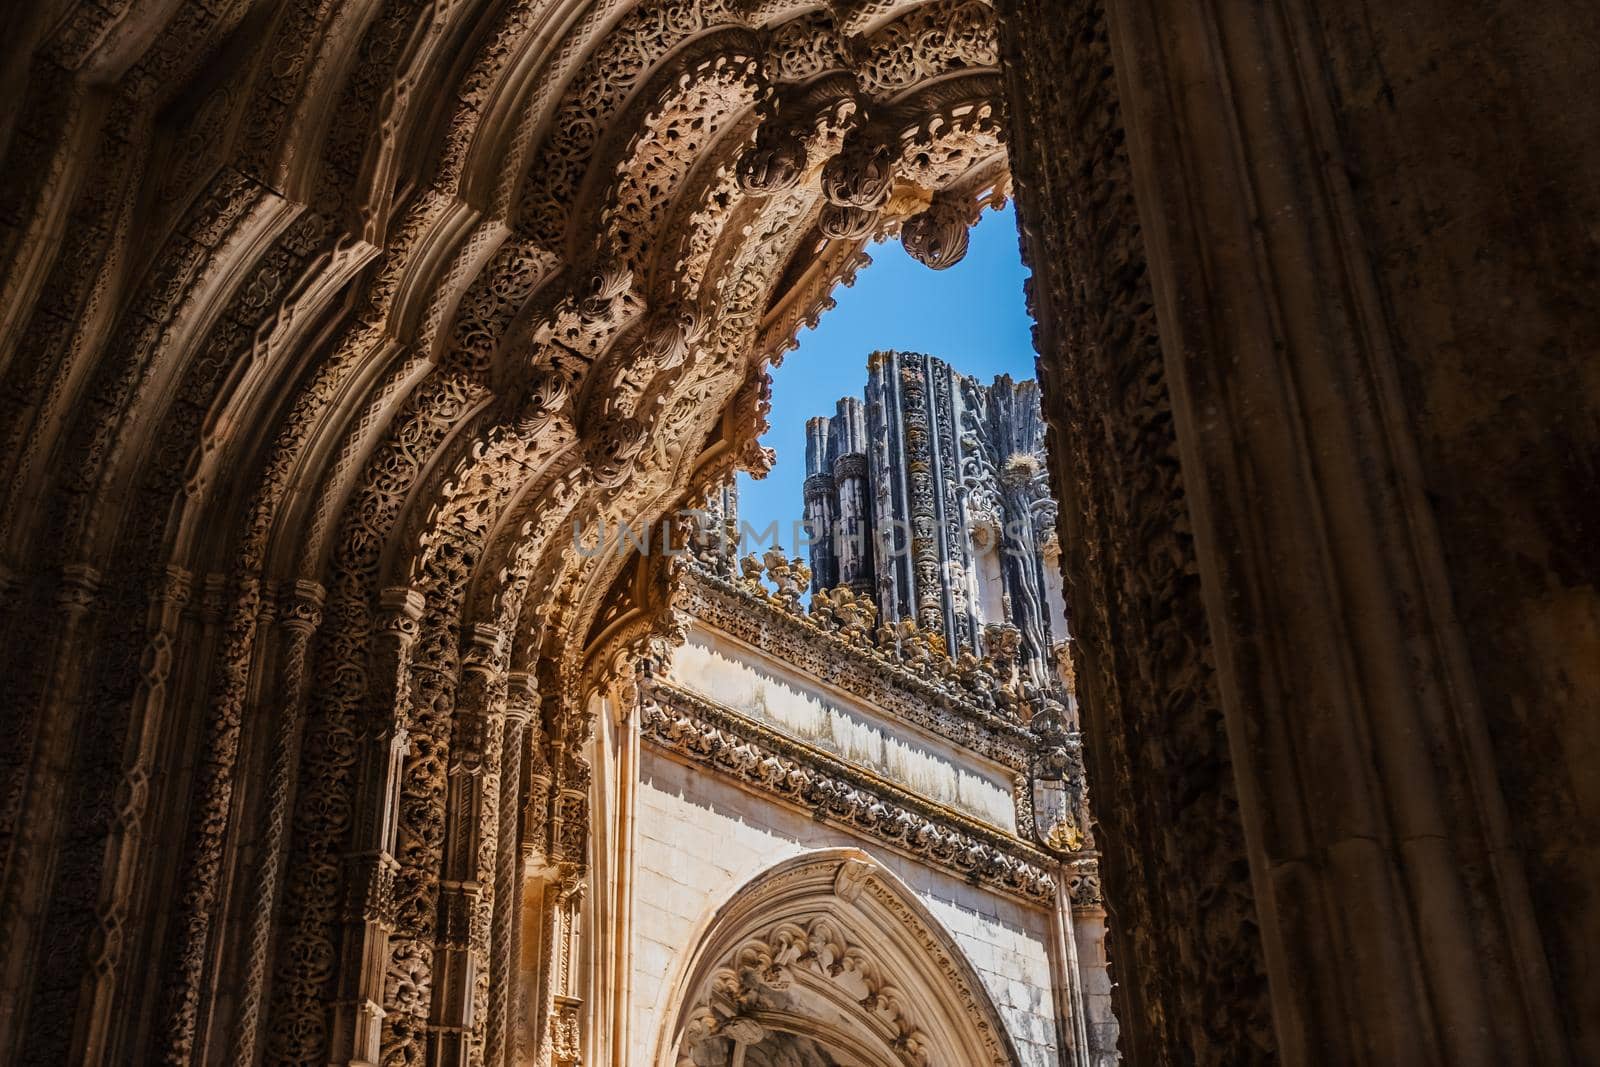 Low angle shot to emphasize the majestic entrance portal to the unfinished chapels of the Monastery of Batalha in Portugal. by Riccarduska